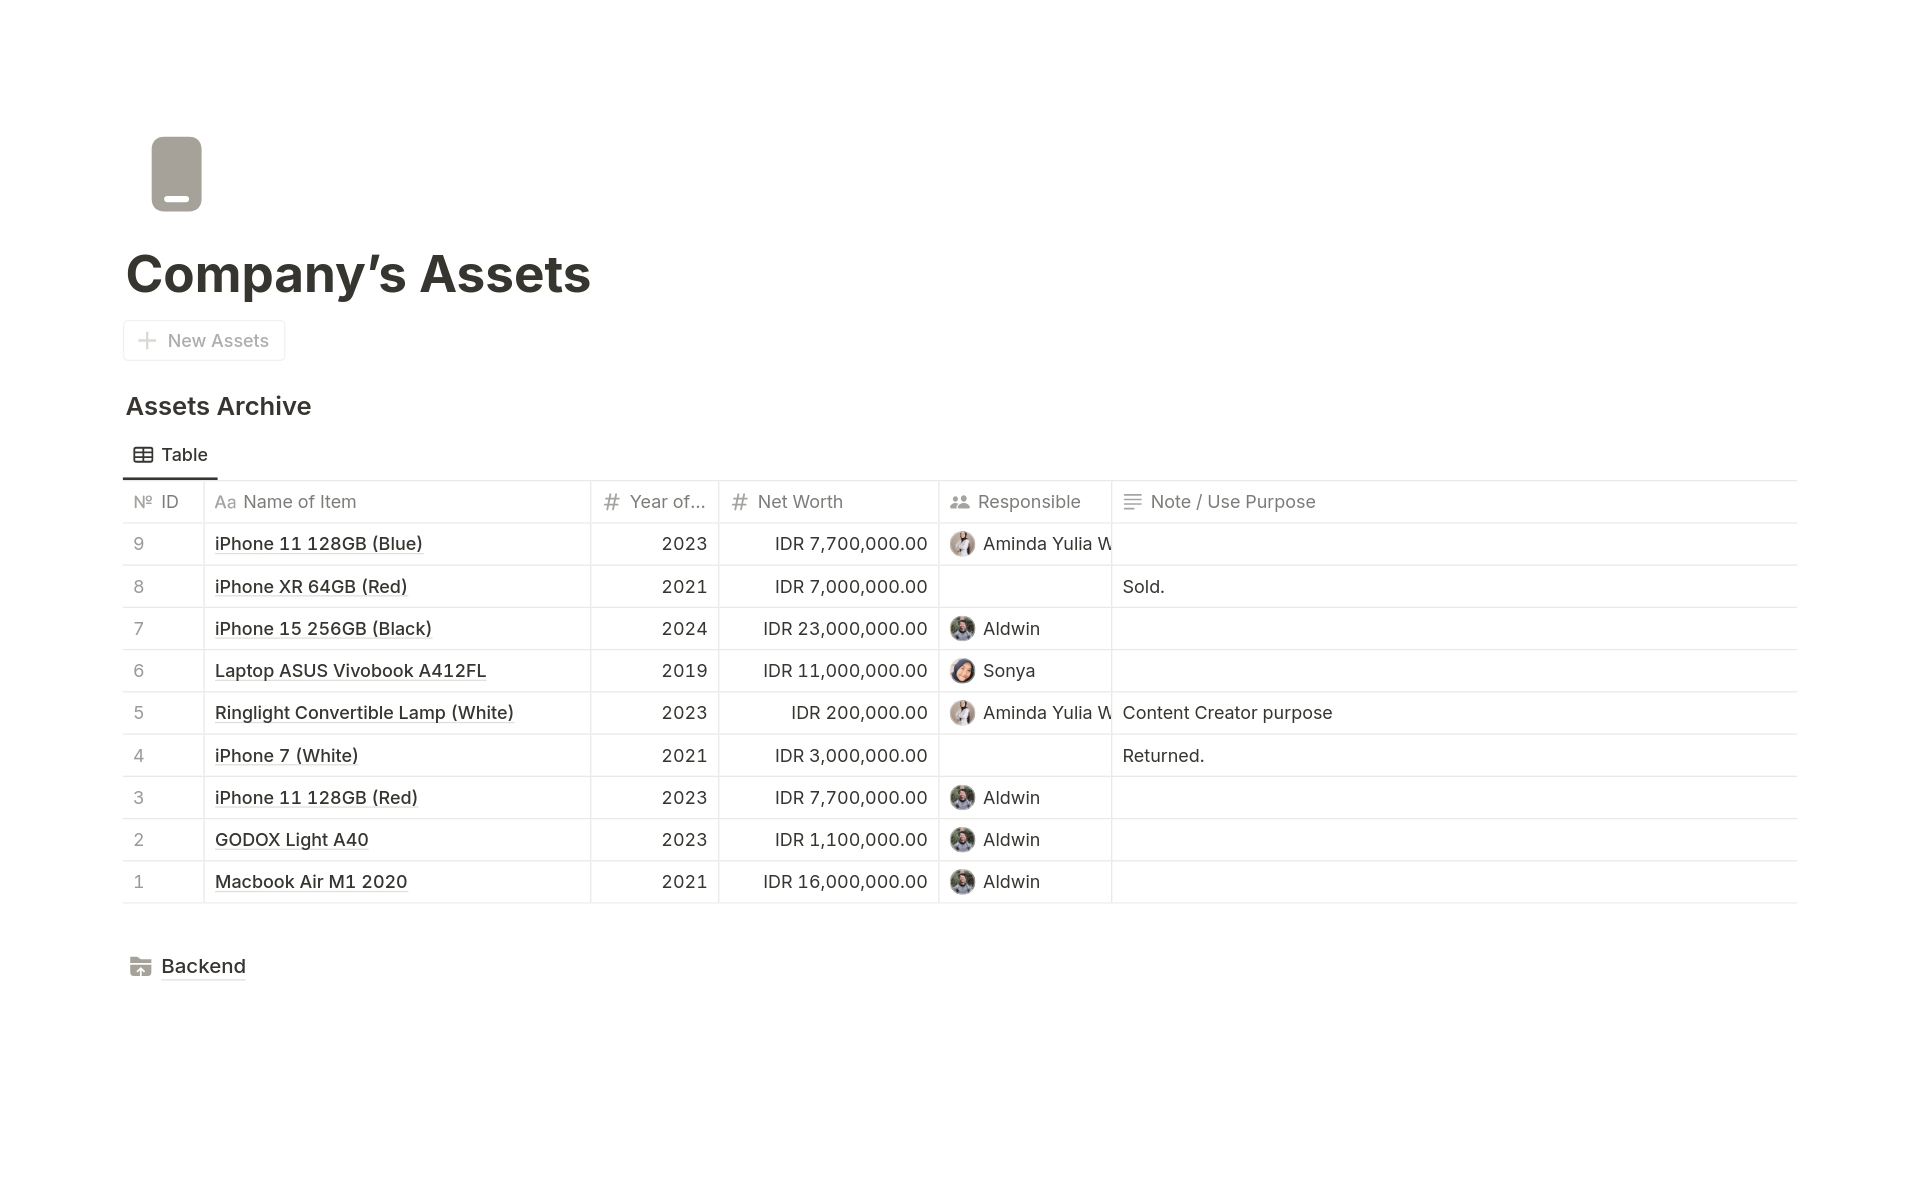 Enhance company asset management with our Notion template. Efficiently track equipment and assets, including lenders and due dates. Input details such as name and net worth per equipment for comprehensive inventory management, all in one-accessible platform.